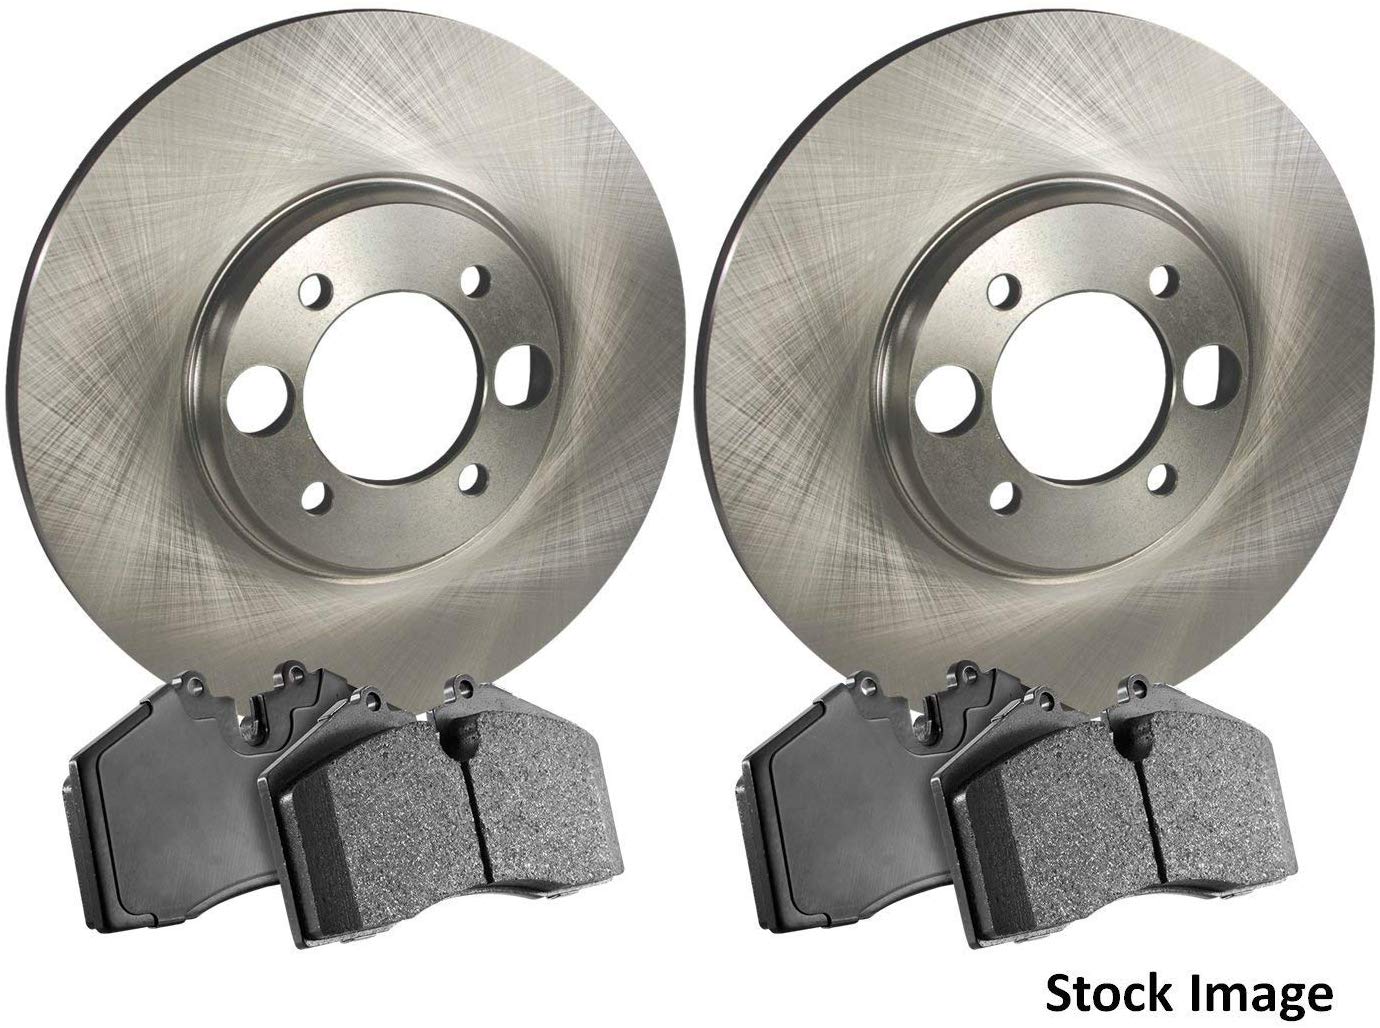 2018 for Kia Sportage Rear Premium Quality Disc Brake Rotors And Ceramic Brake Pads - (For Both Left and Right) One Year Warranty